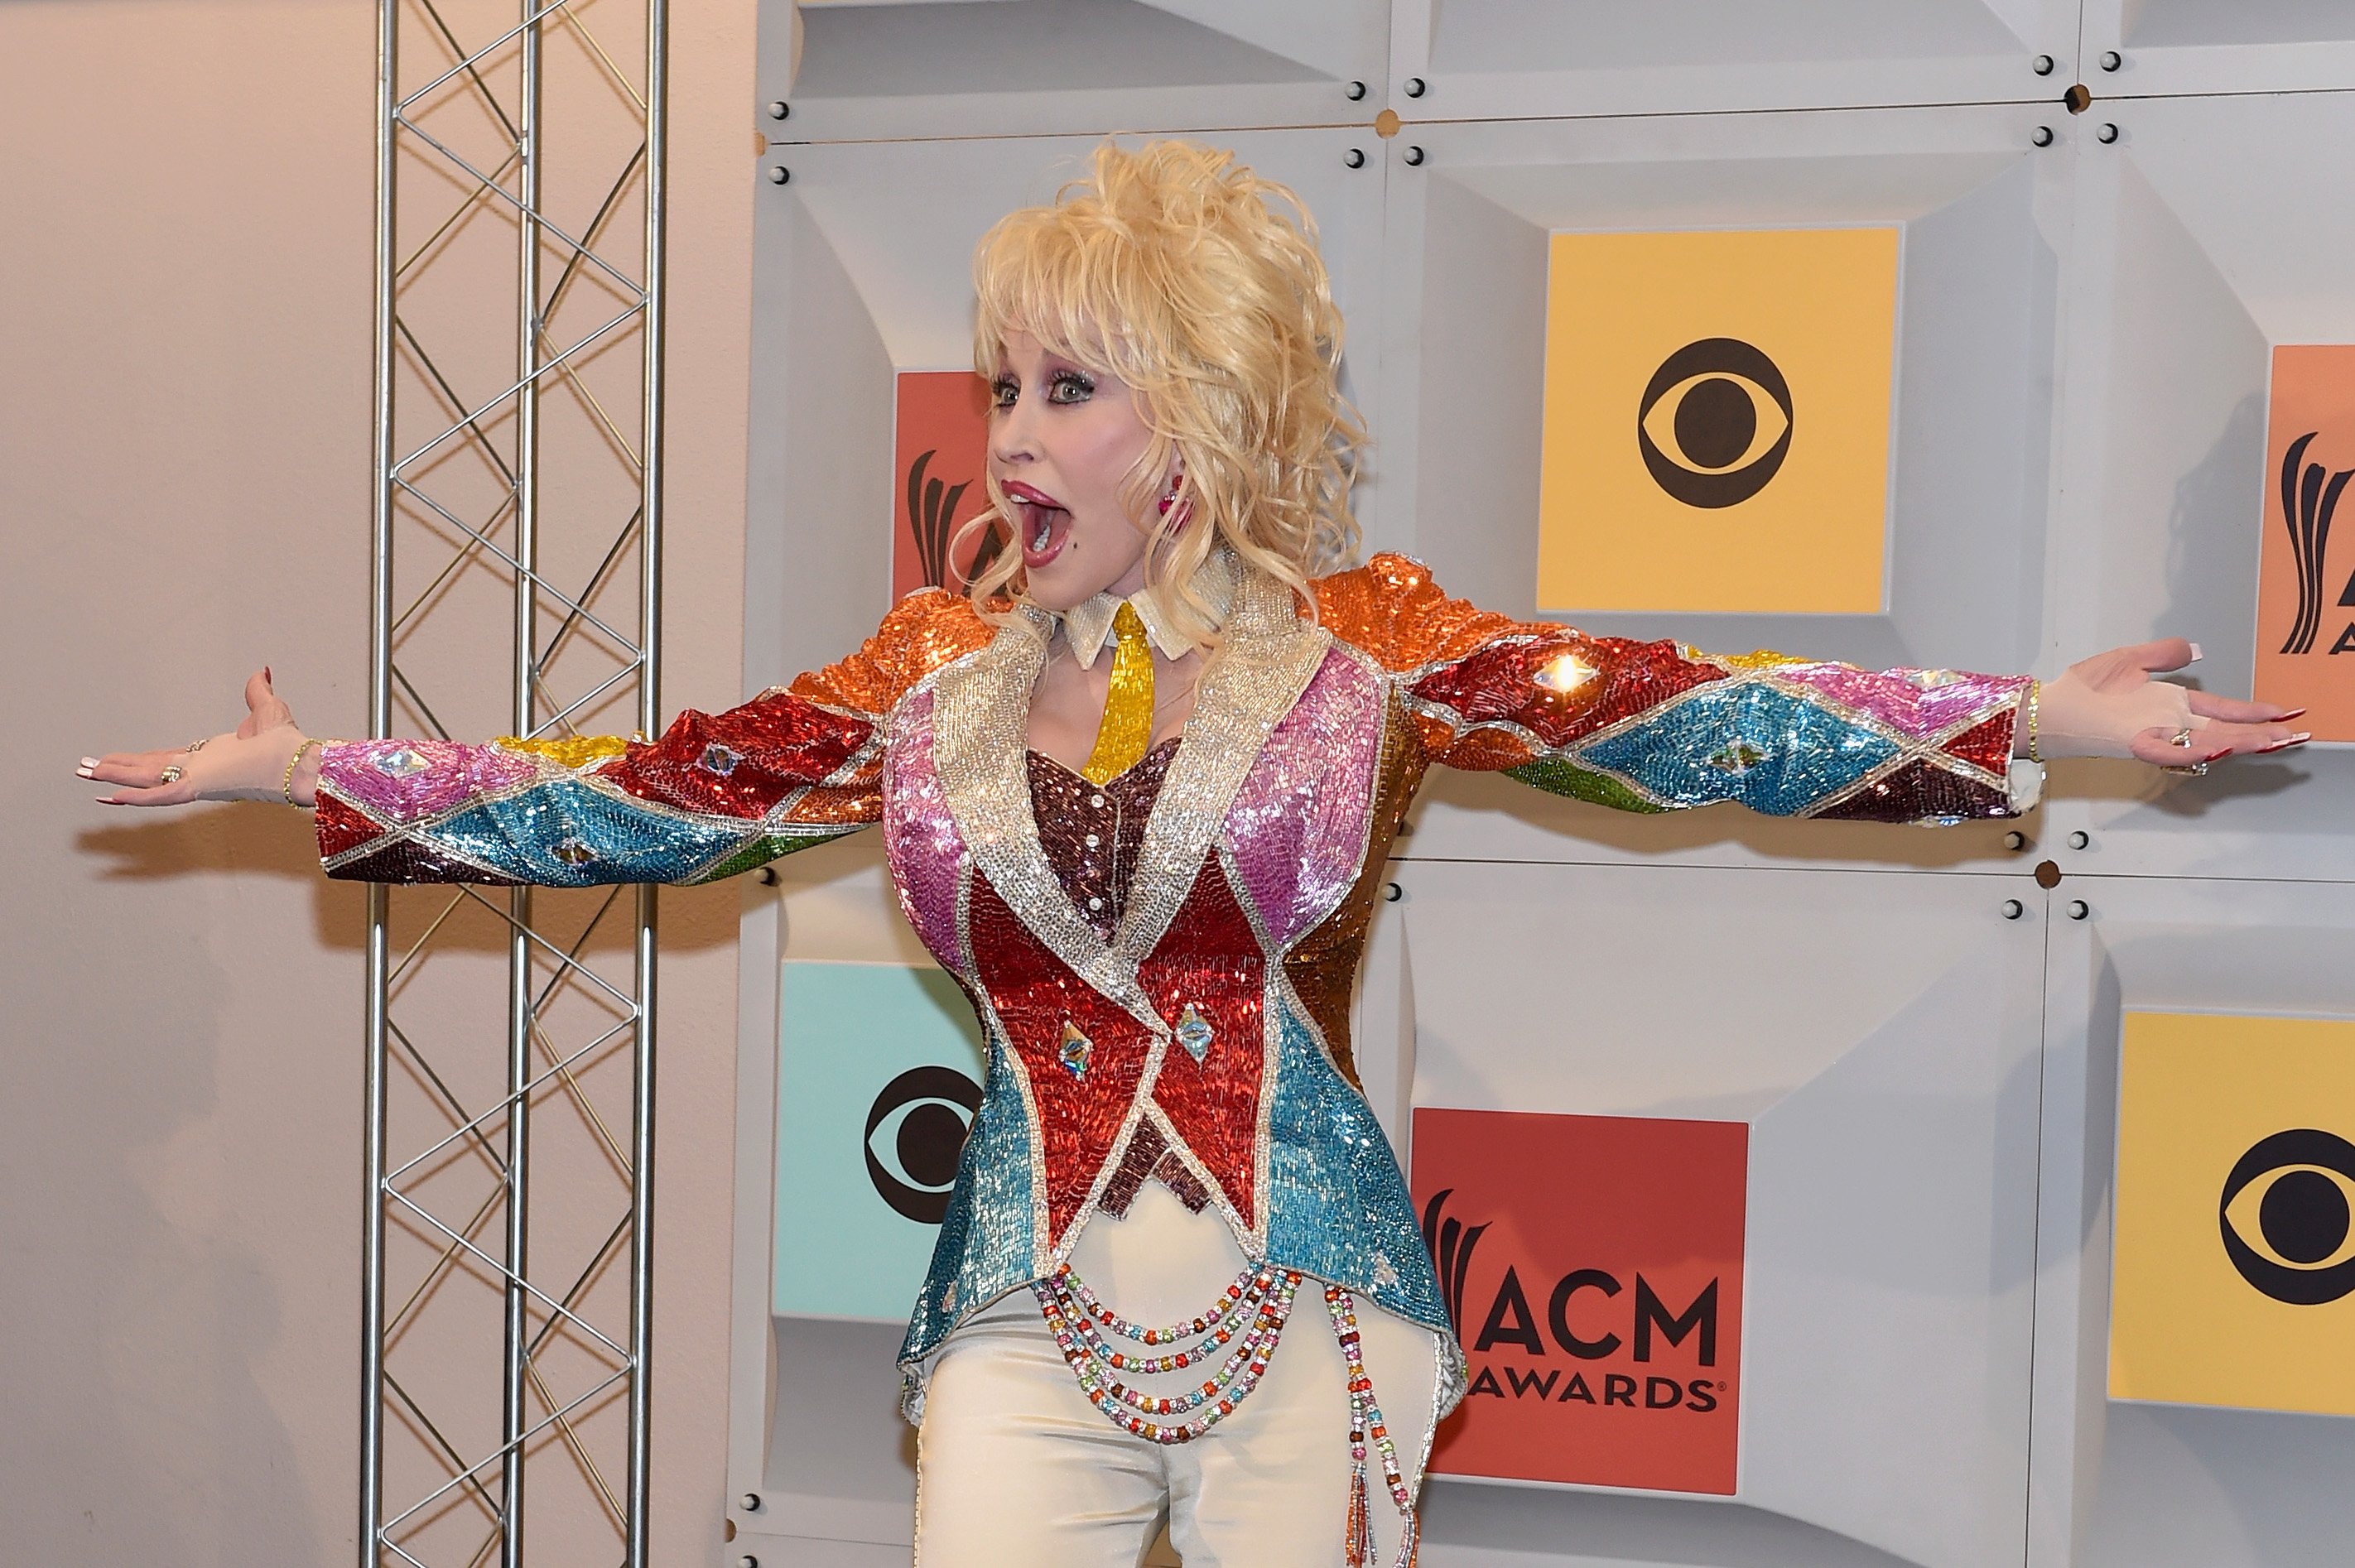 Dolly Parton excitedly poses for photos in a sparkly, multi-colored suit.